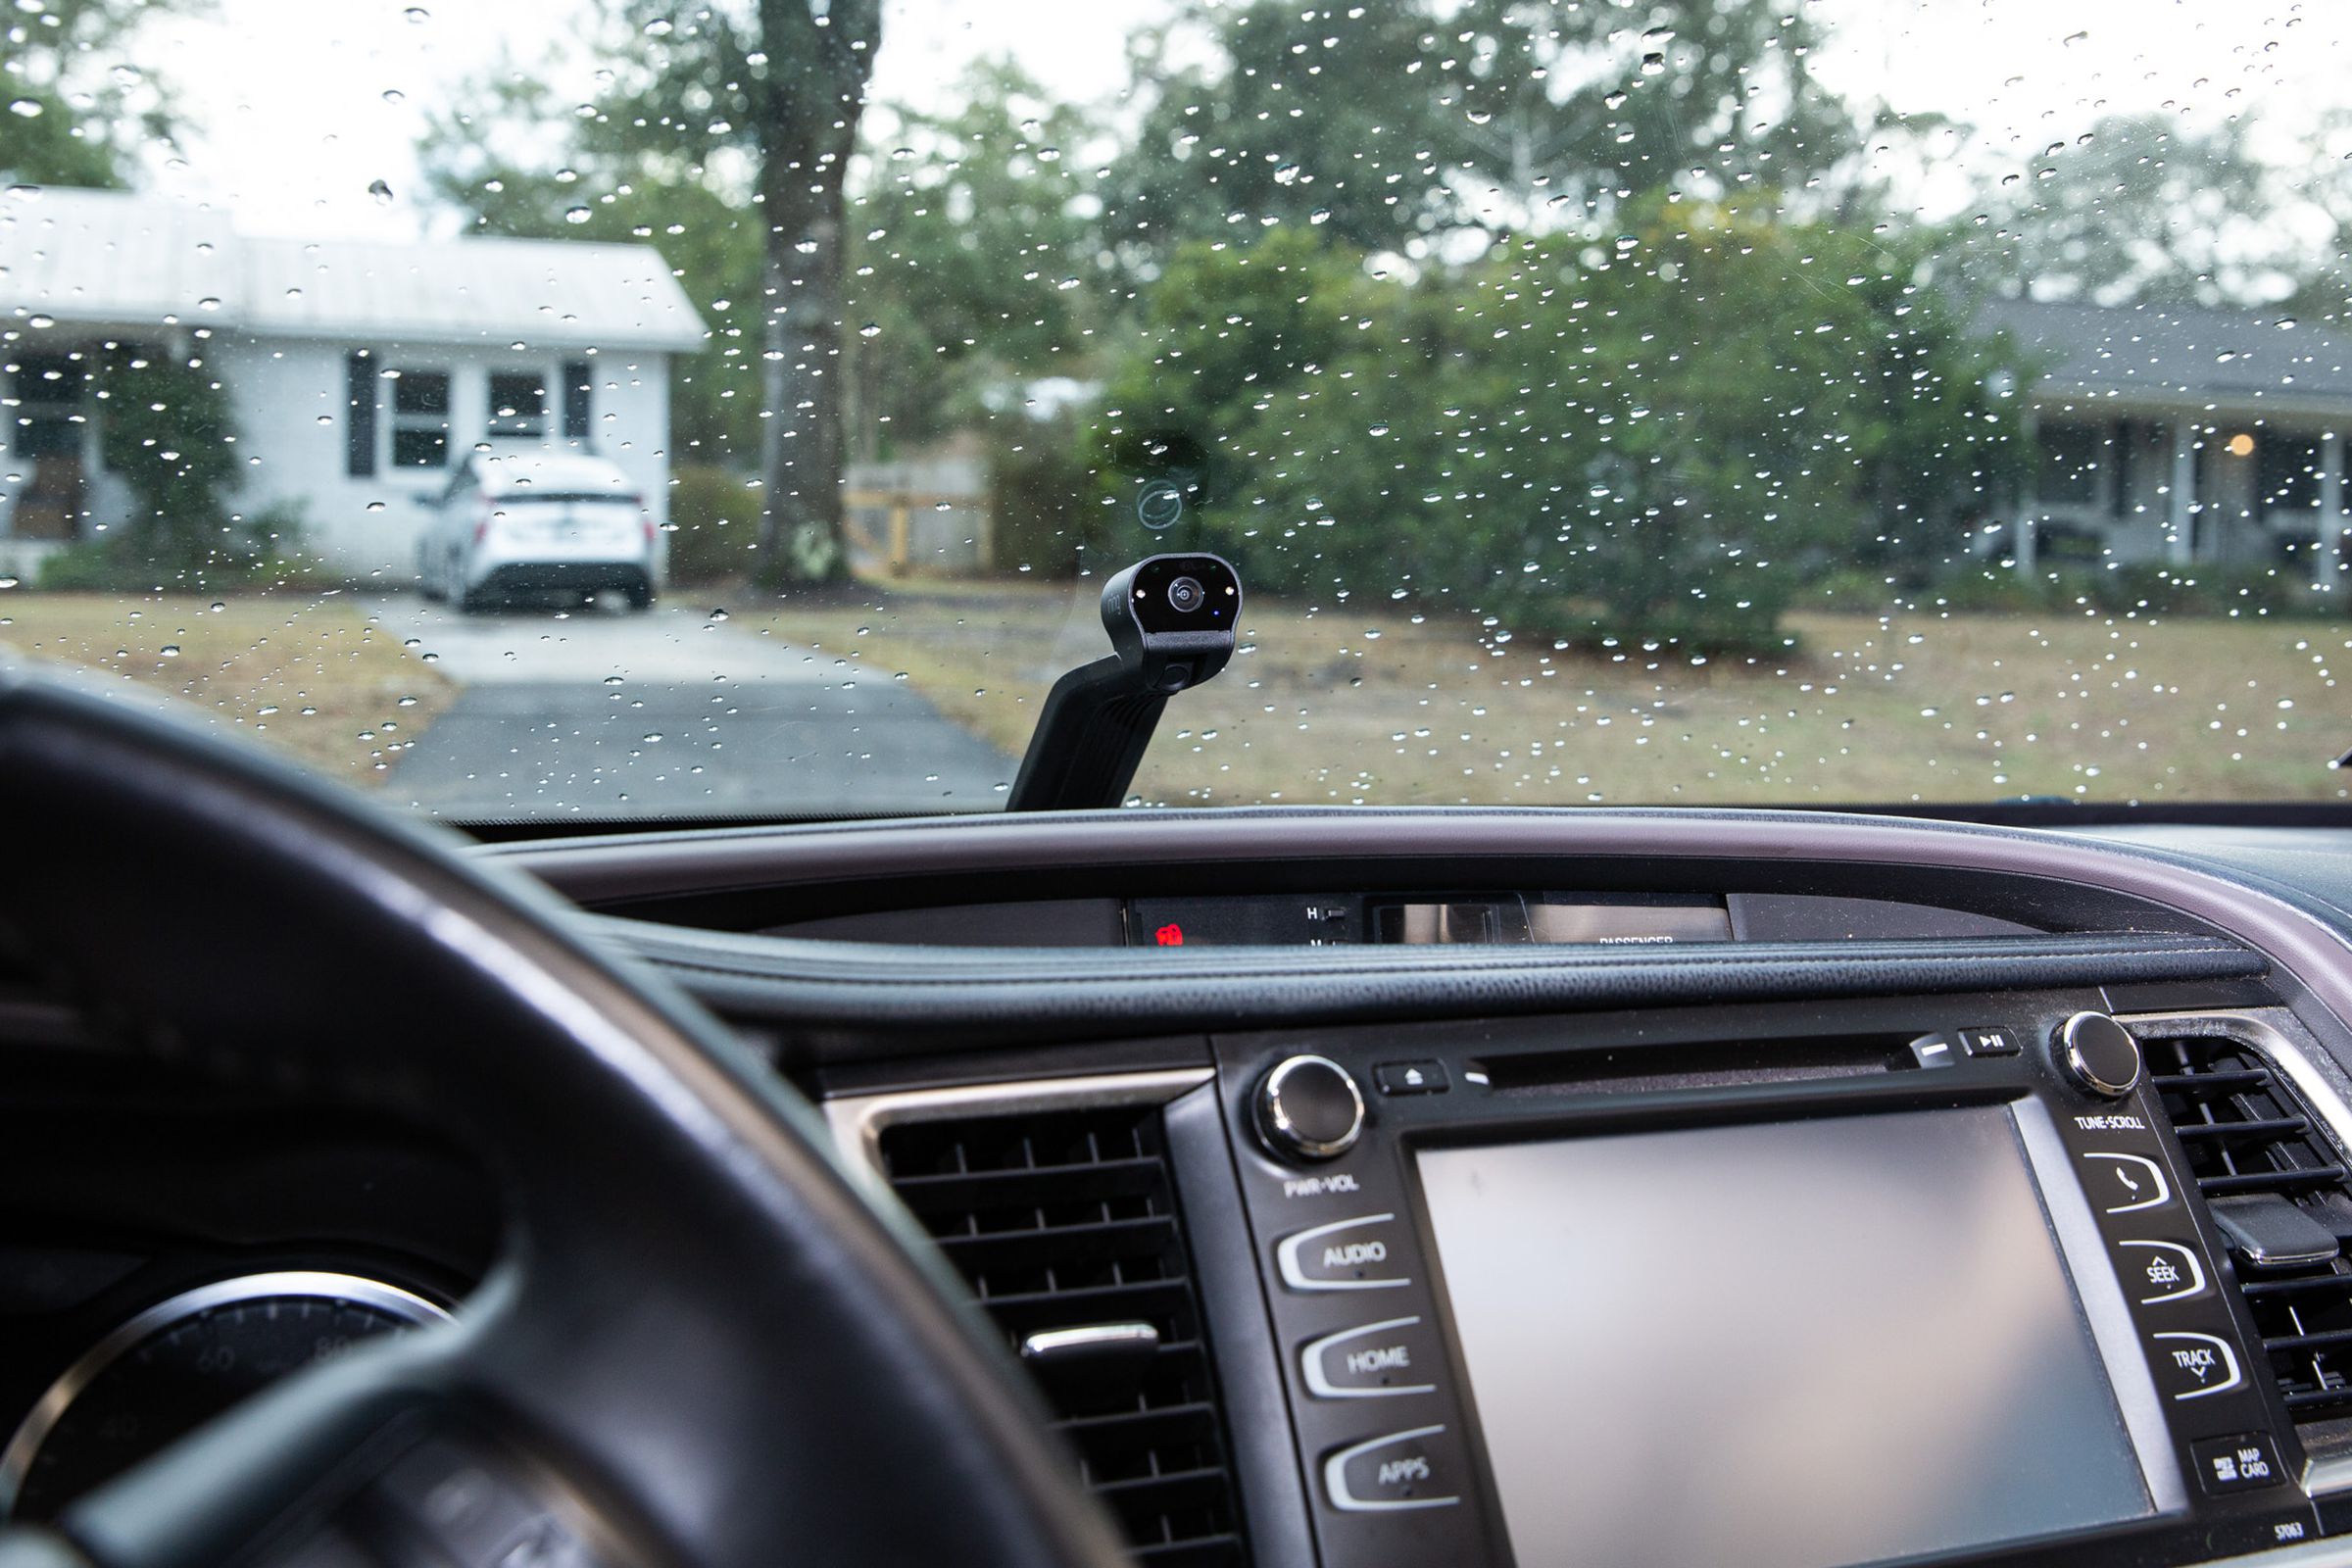 The Car Cam has several competitors, but its low profile and two-way talk are quite unique in the category.